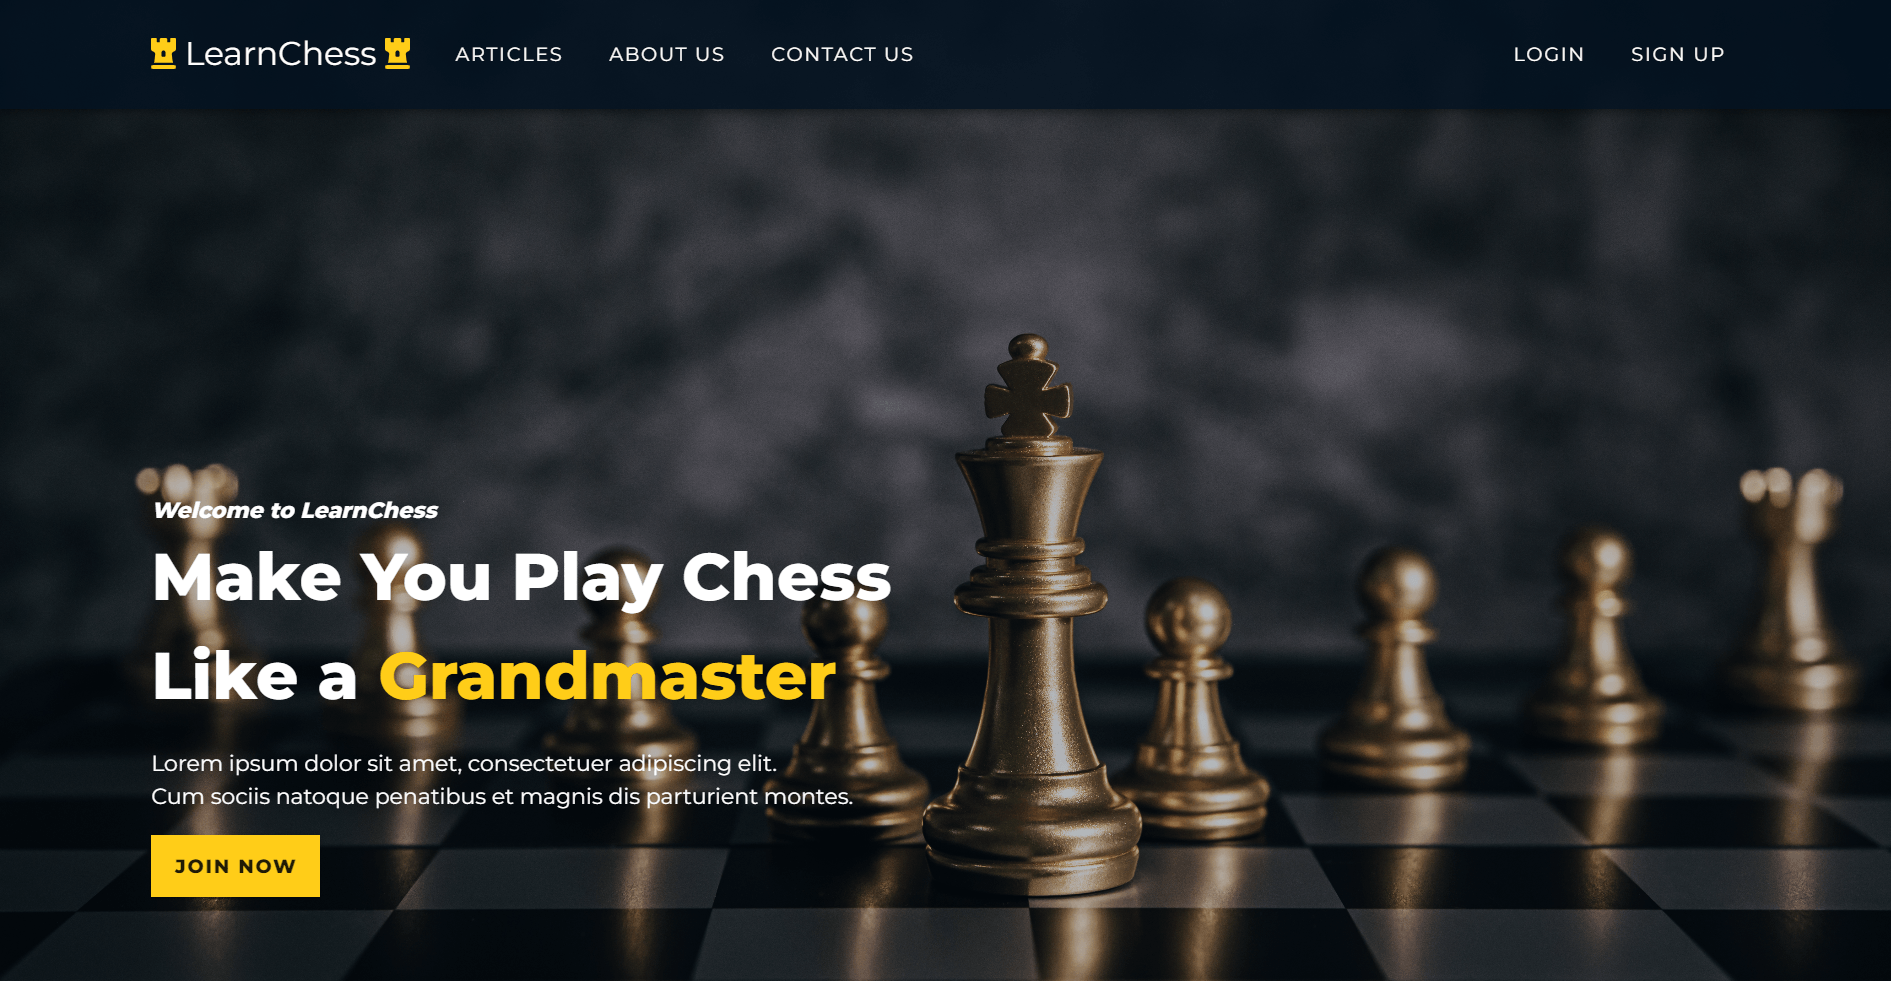 Project i have worked in named LearnChess